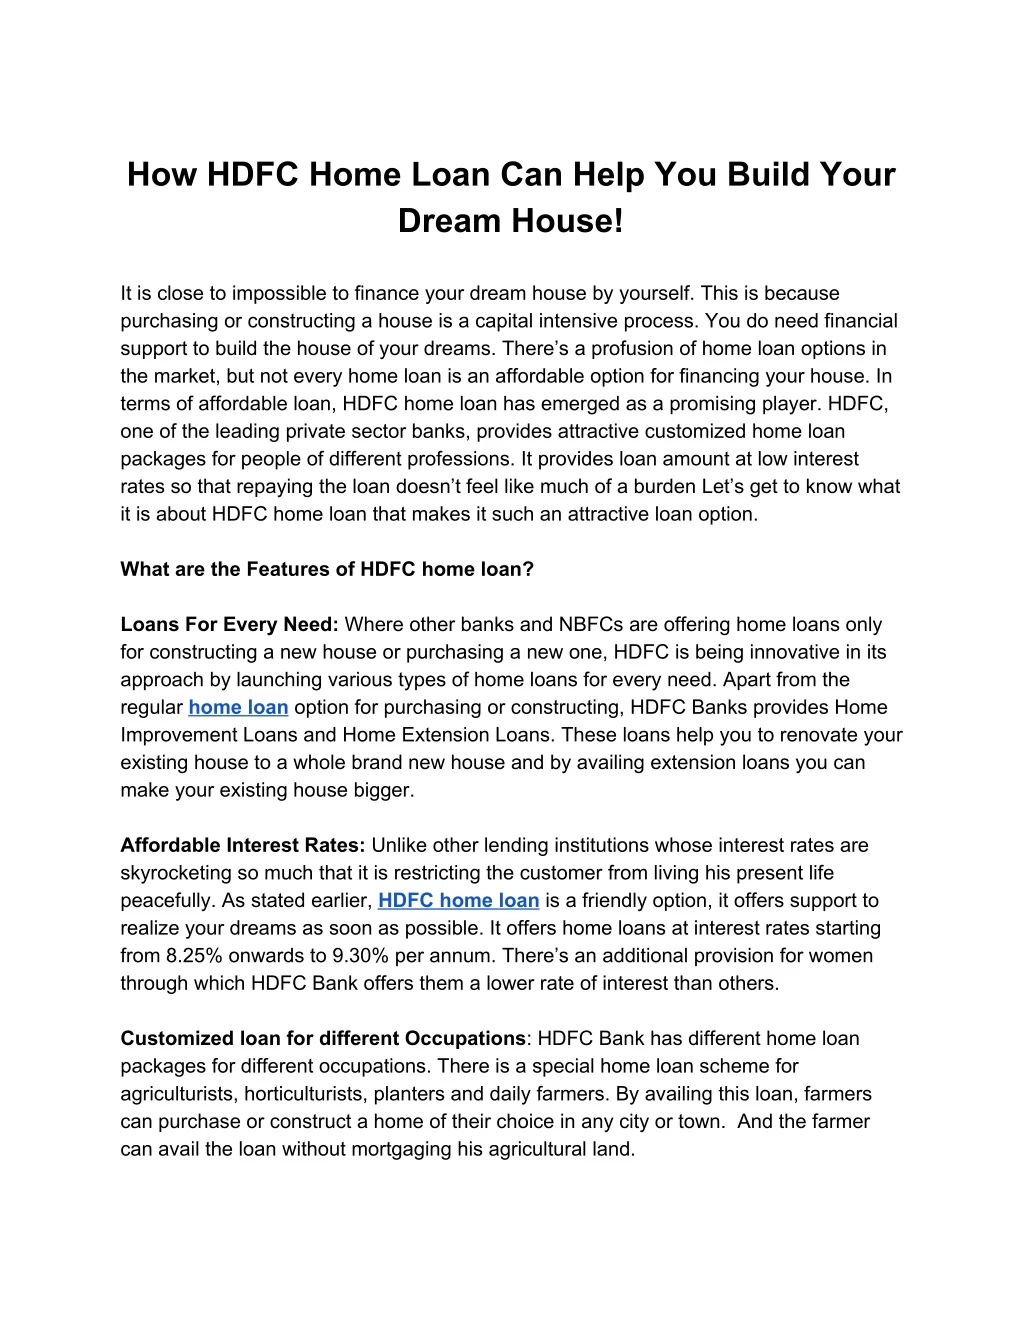 how hdfc home loan can help you build your dream